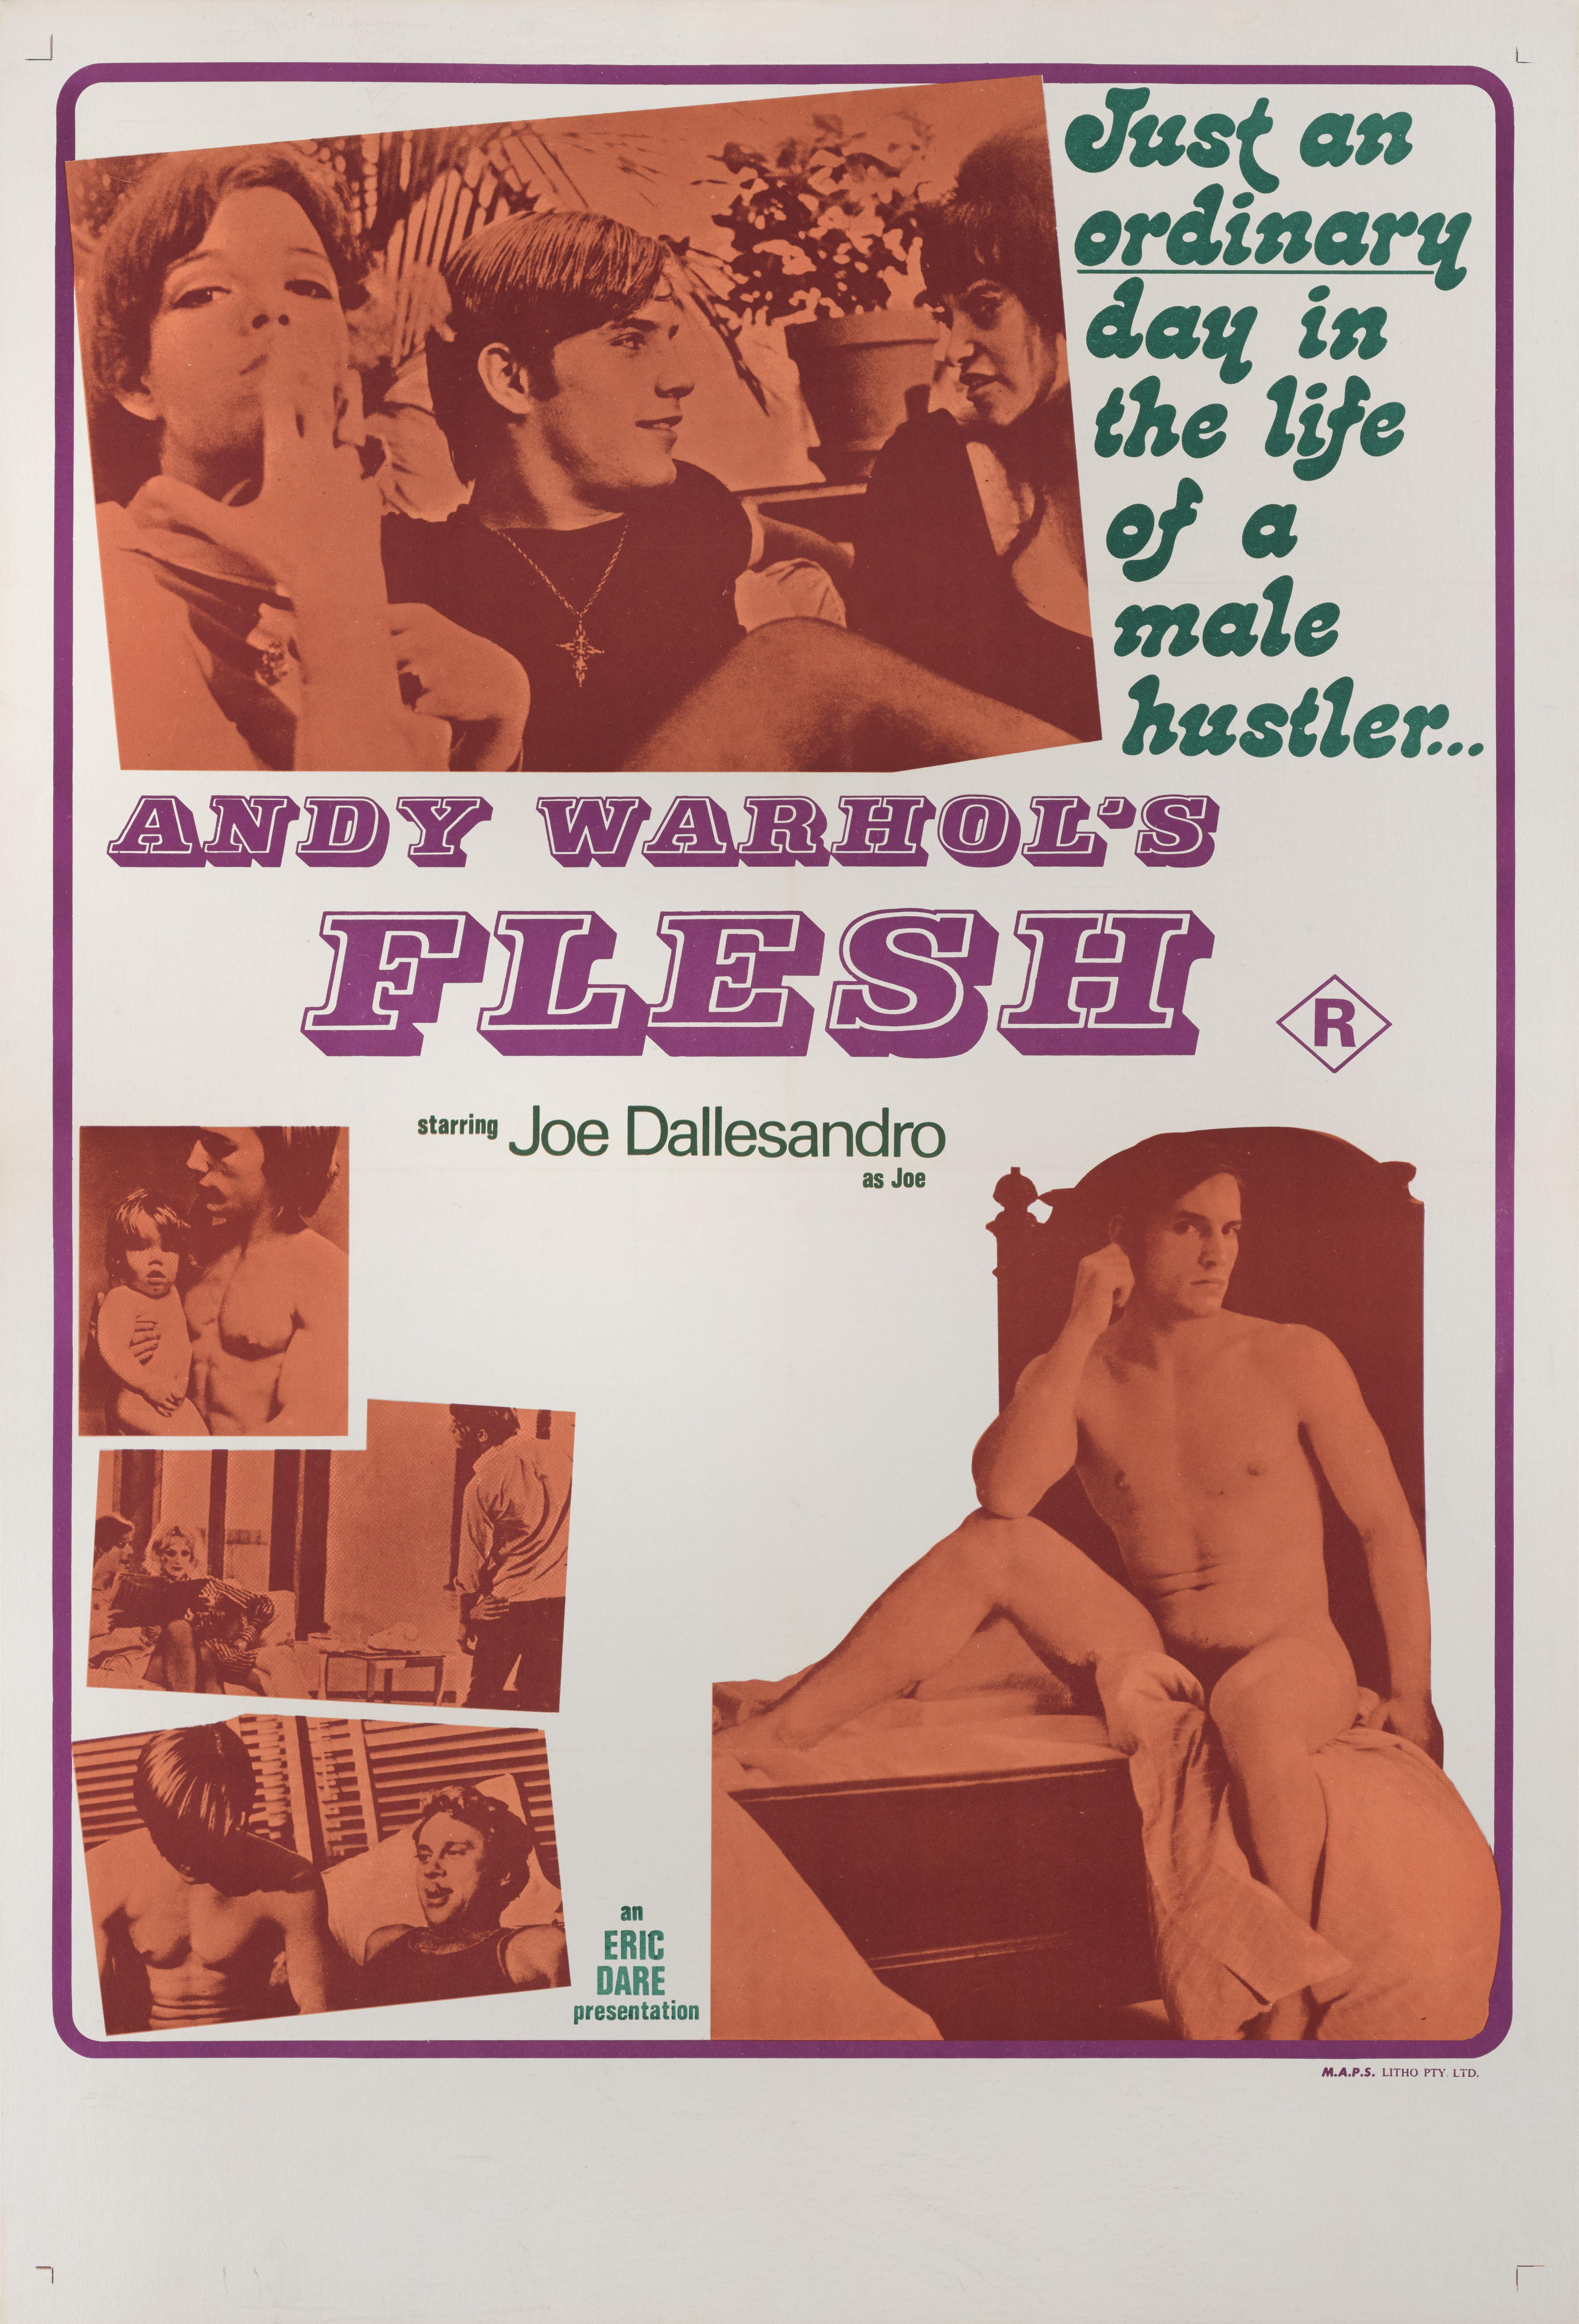 Original Australian film poster for the 1968 drama staring Joe Dallesandro and Geraldine Smith, and directed by Paul Morrissey. This film was produced by Andy Warhol.
This poster is conservation linen backed and it would be shipped rolled in a